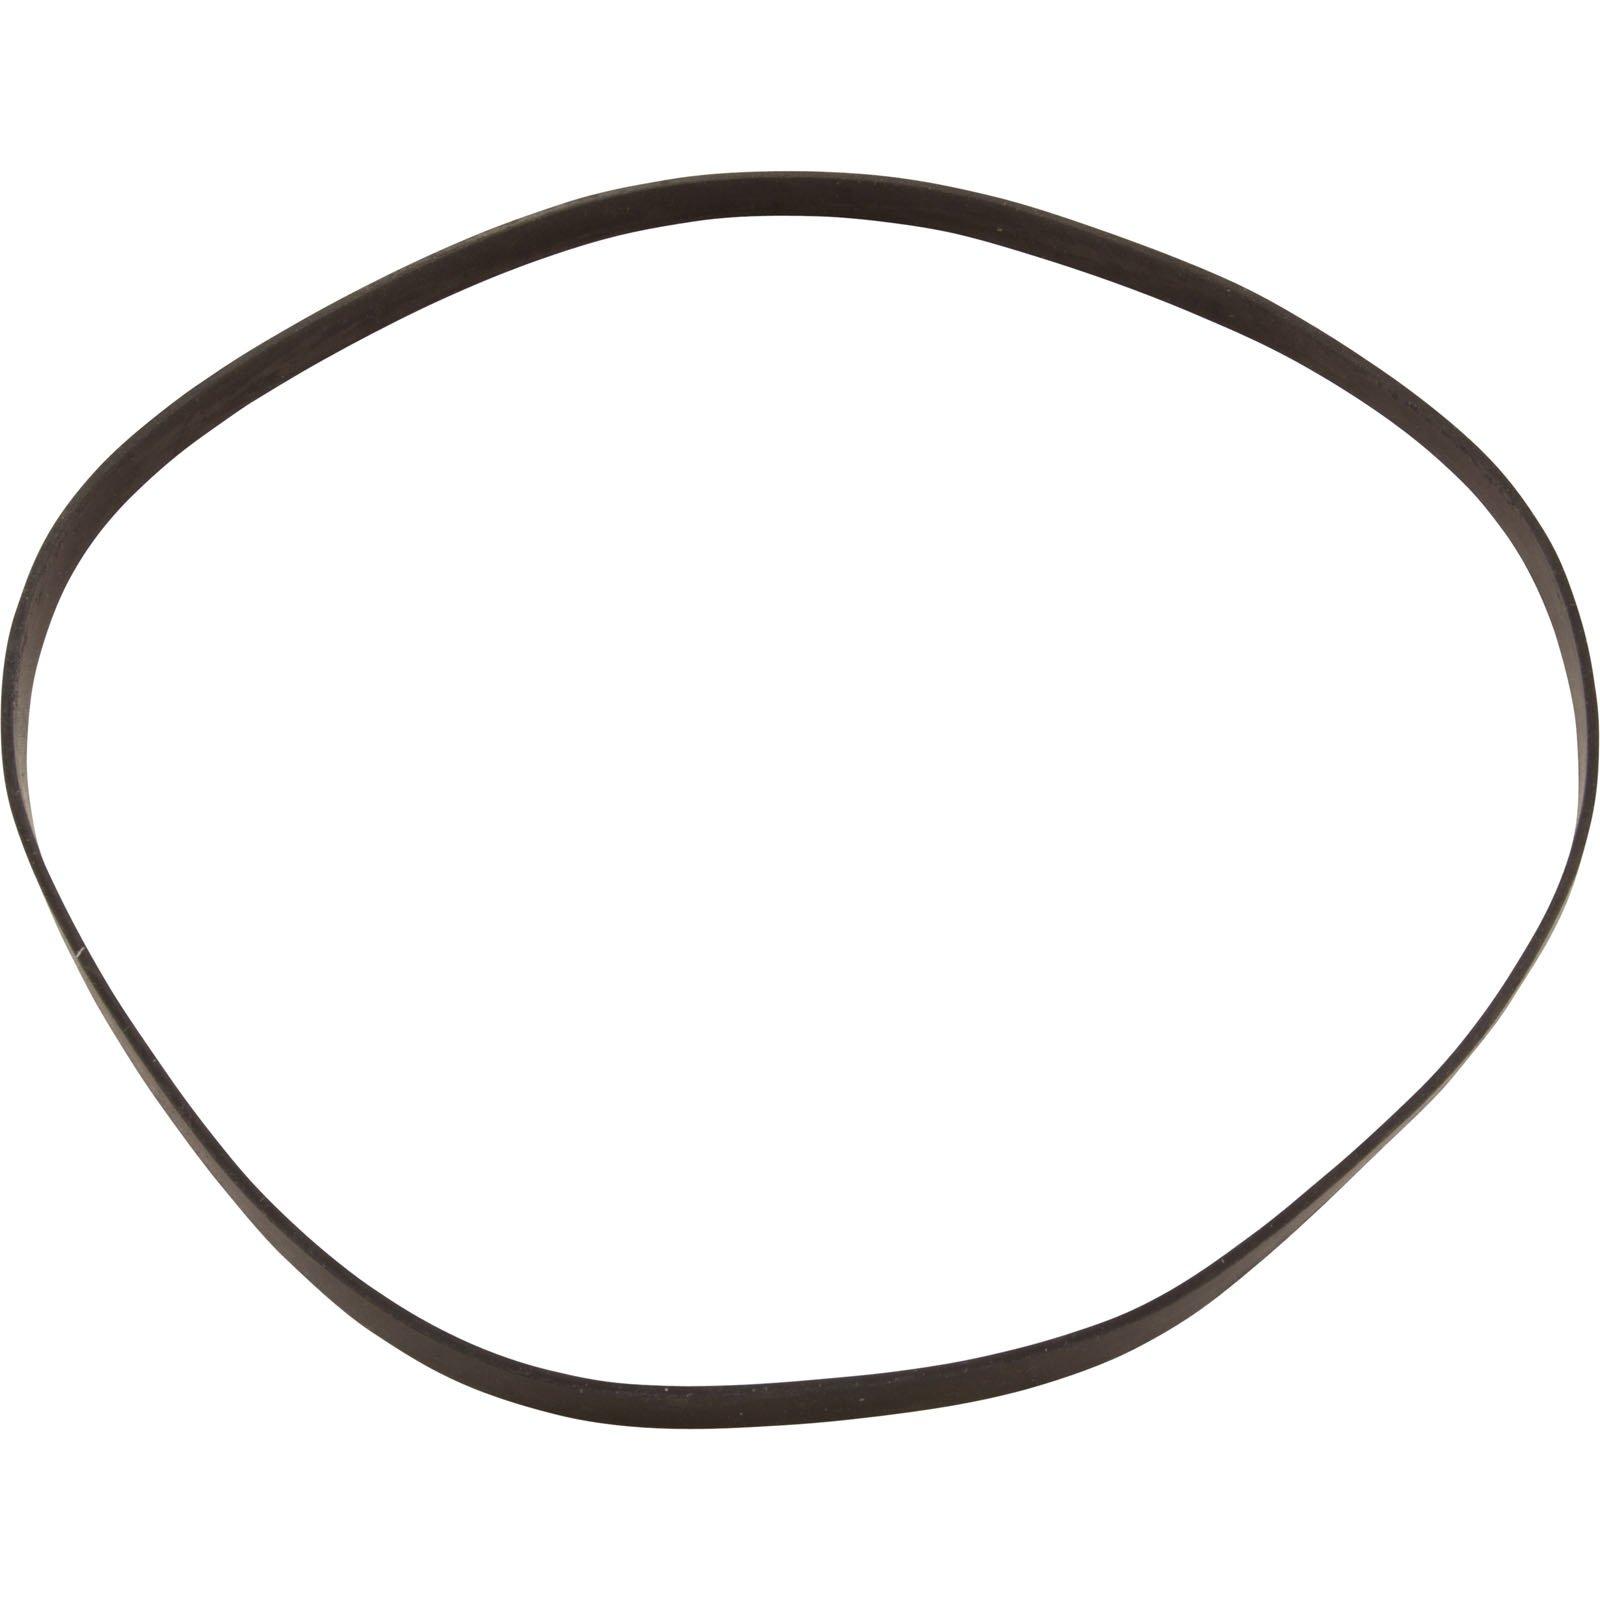 All Seals - Replacement Seal Plate Gasket for Hayward Max-Flo